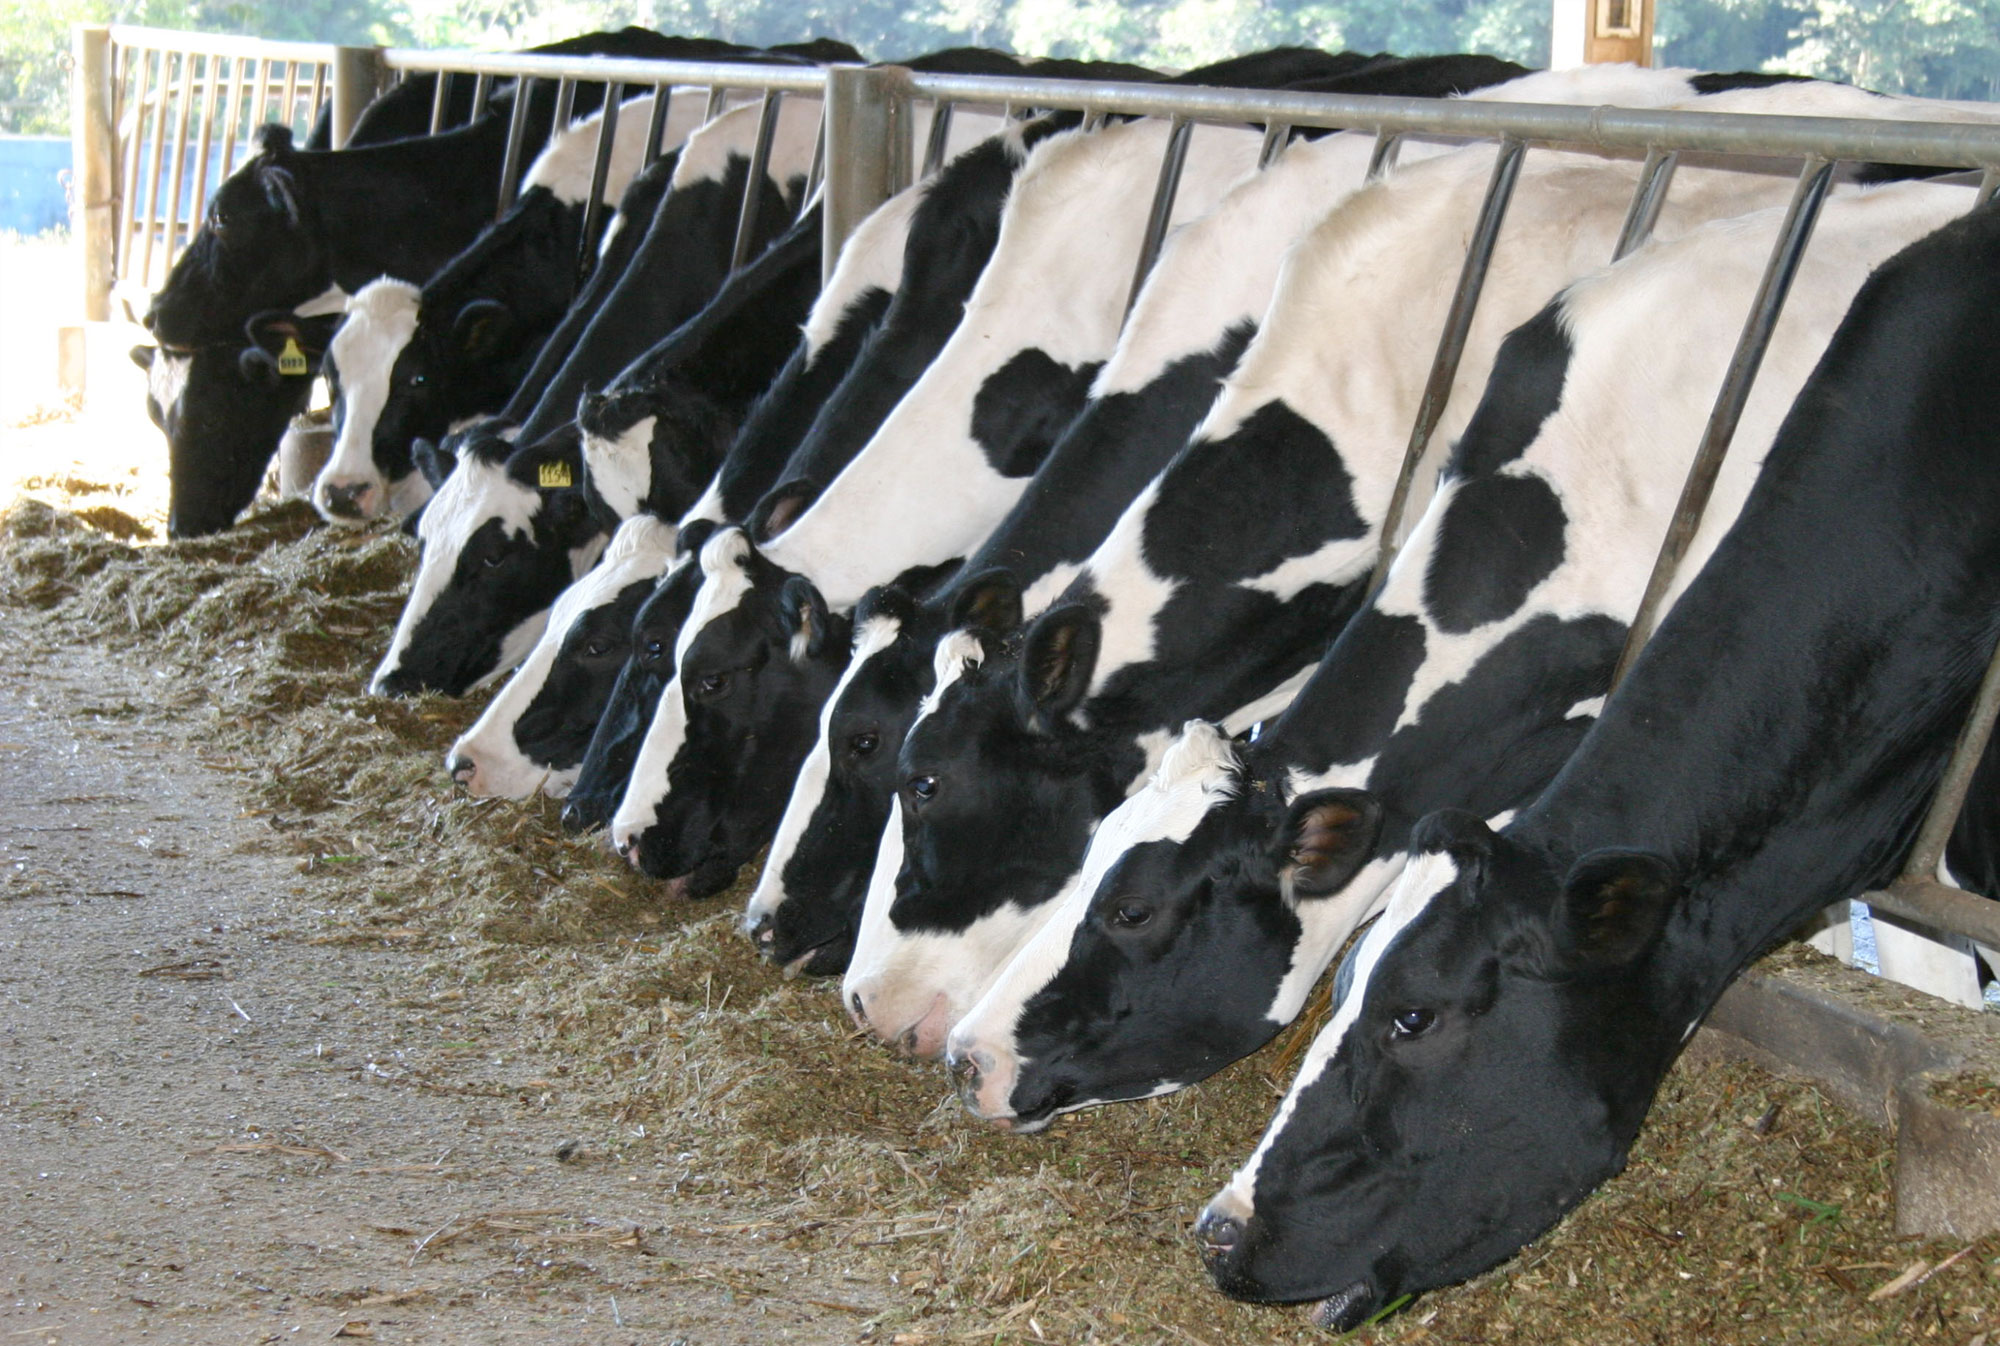 Heat stress in dairy cows housed in confinement systems